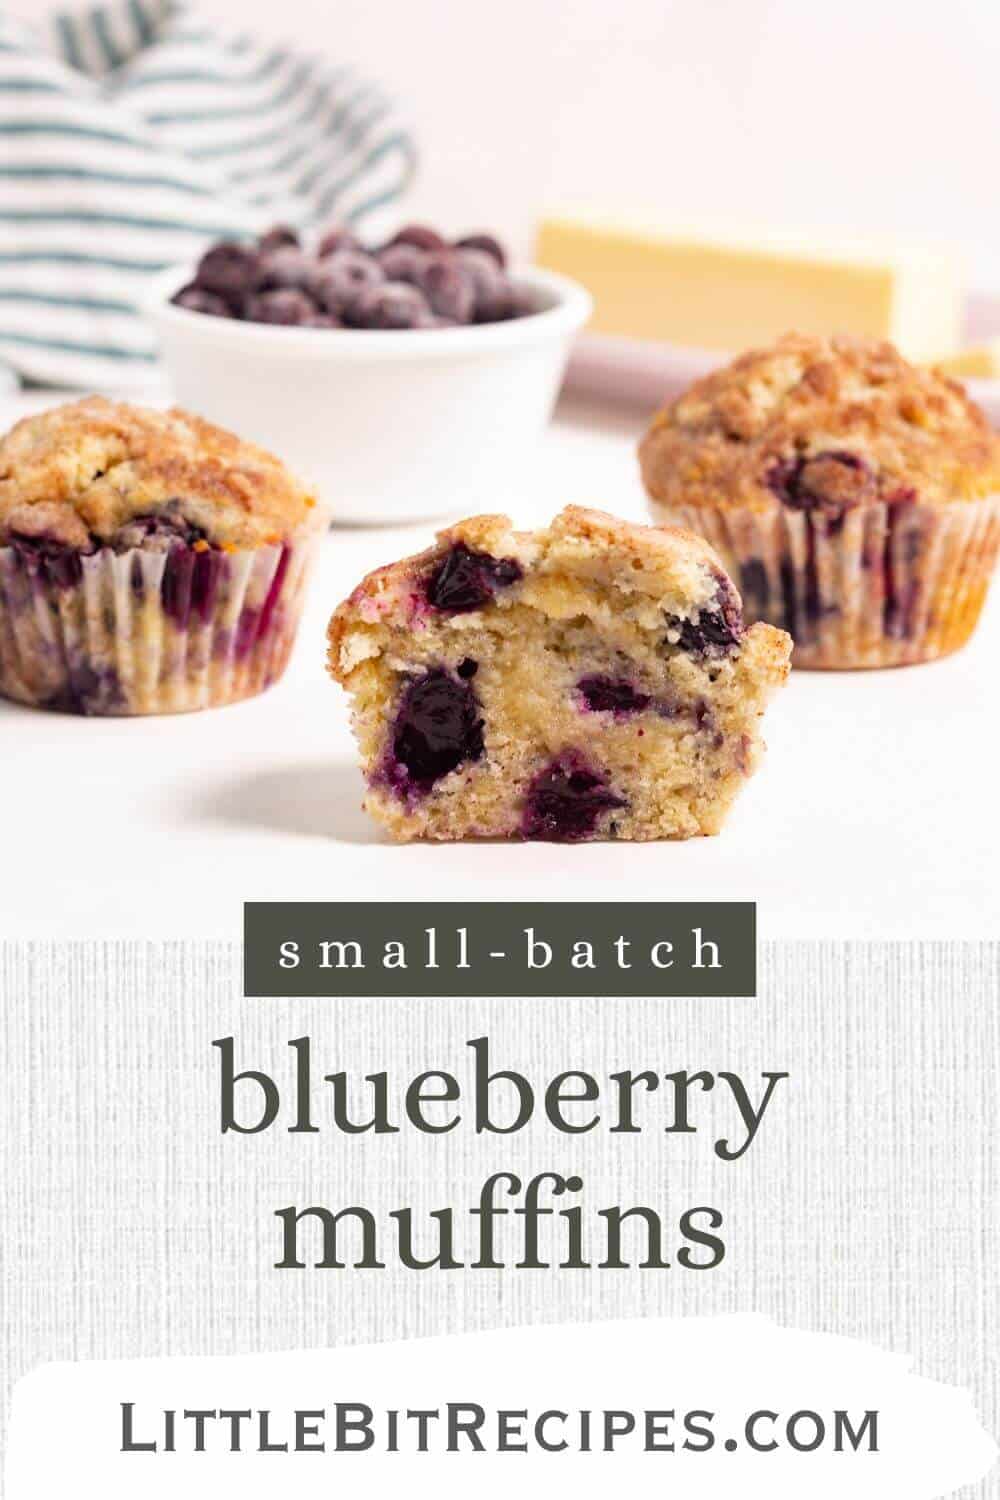 Small-batch blueberry muffins with text.